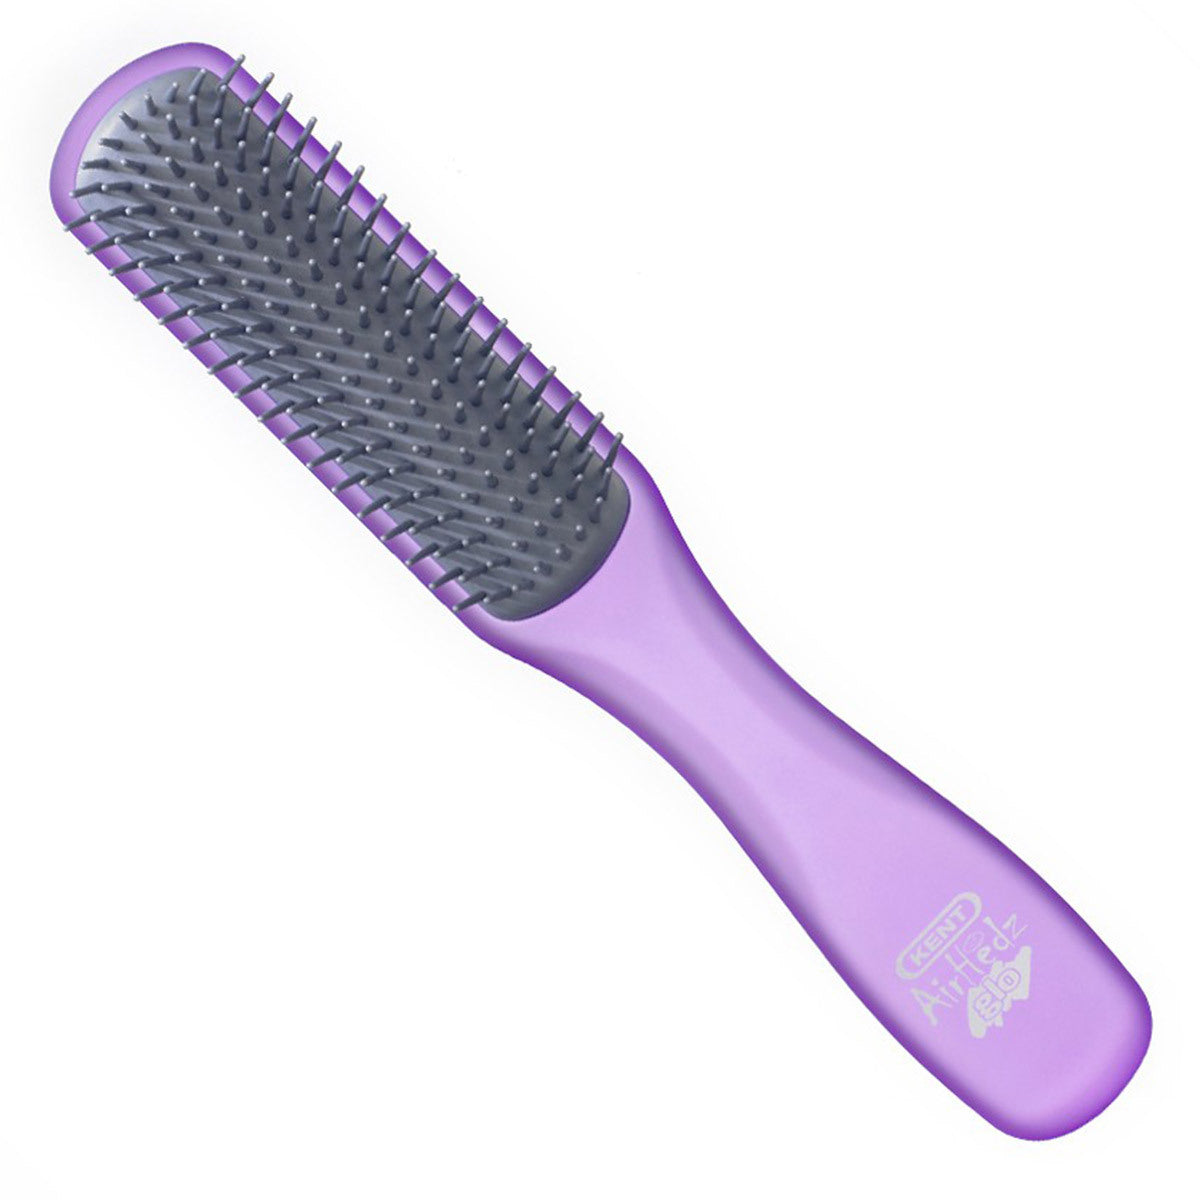 Primary image of Airhedz Glo Flat Hairbrush for Short Hair - AHGLO02